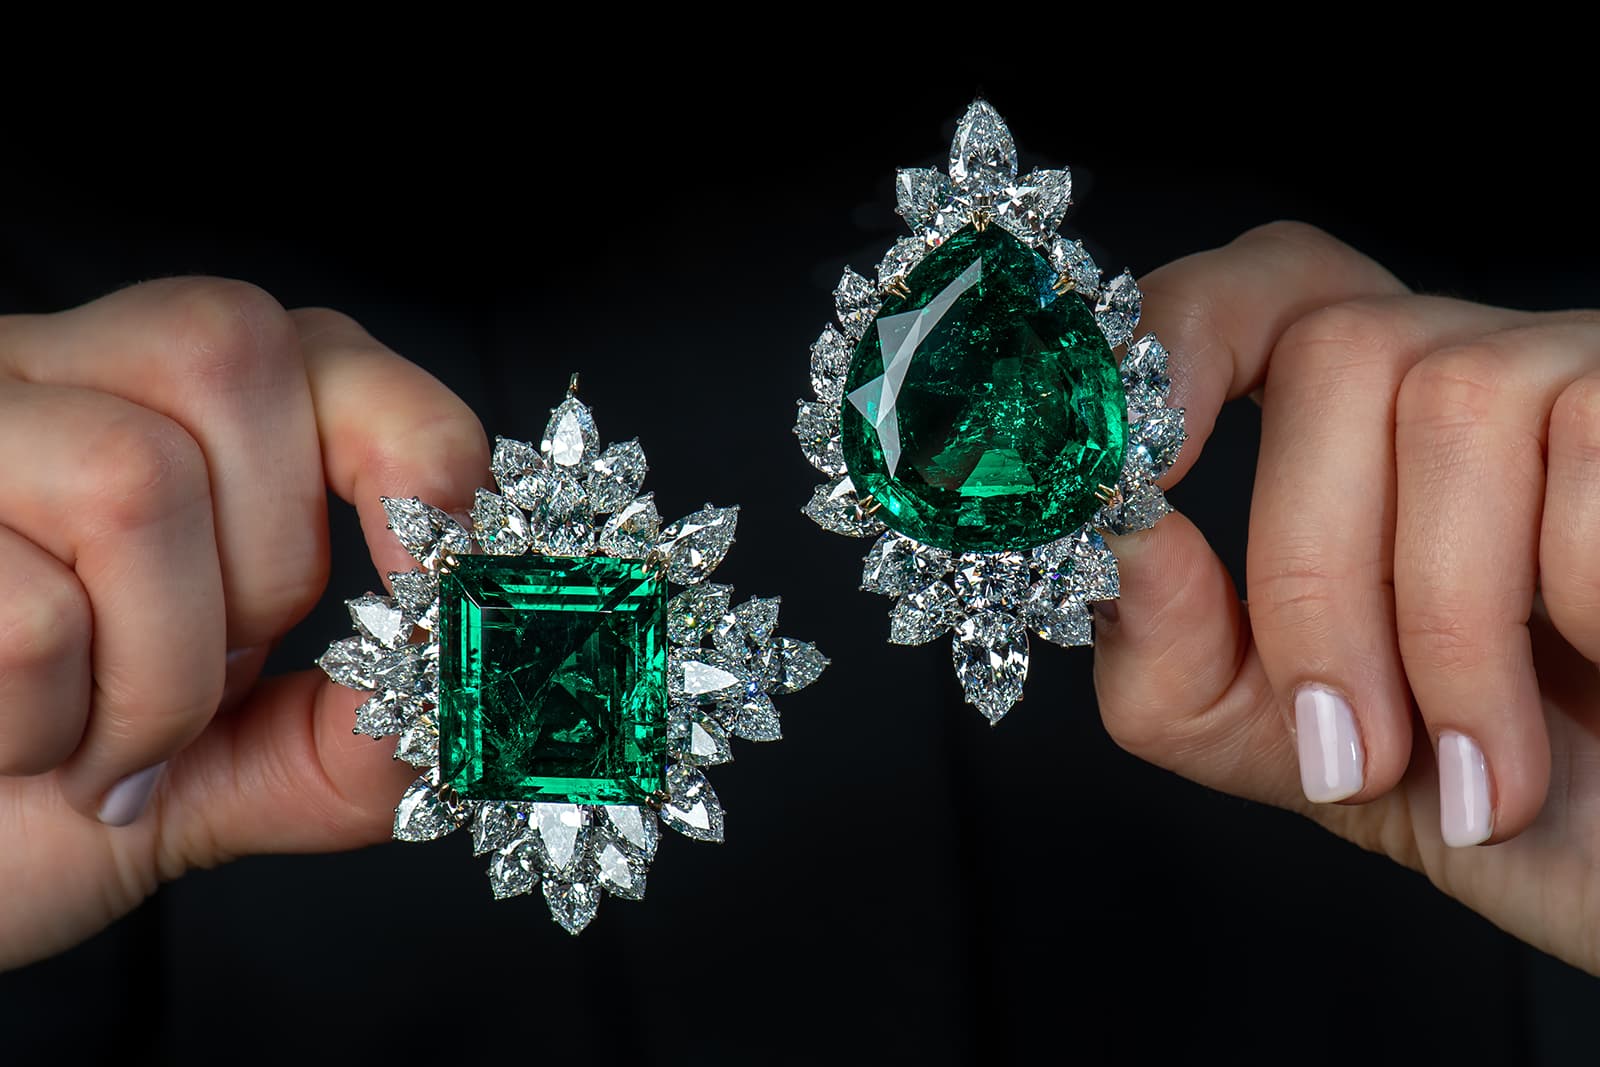 An 80.45 carat step-cut Colombian emerald and diamond brooch (left) and a 104.40 carat Colombian pear-shaped emerald and diamond brooch by Harry Winston (right). Both jewels come from an Important Noble Collection and will be offered in the Sotheby’s Magnificent Jewels and Noble Jewels auction in Geneva in May 2021 